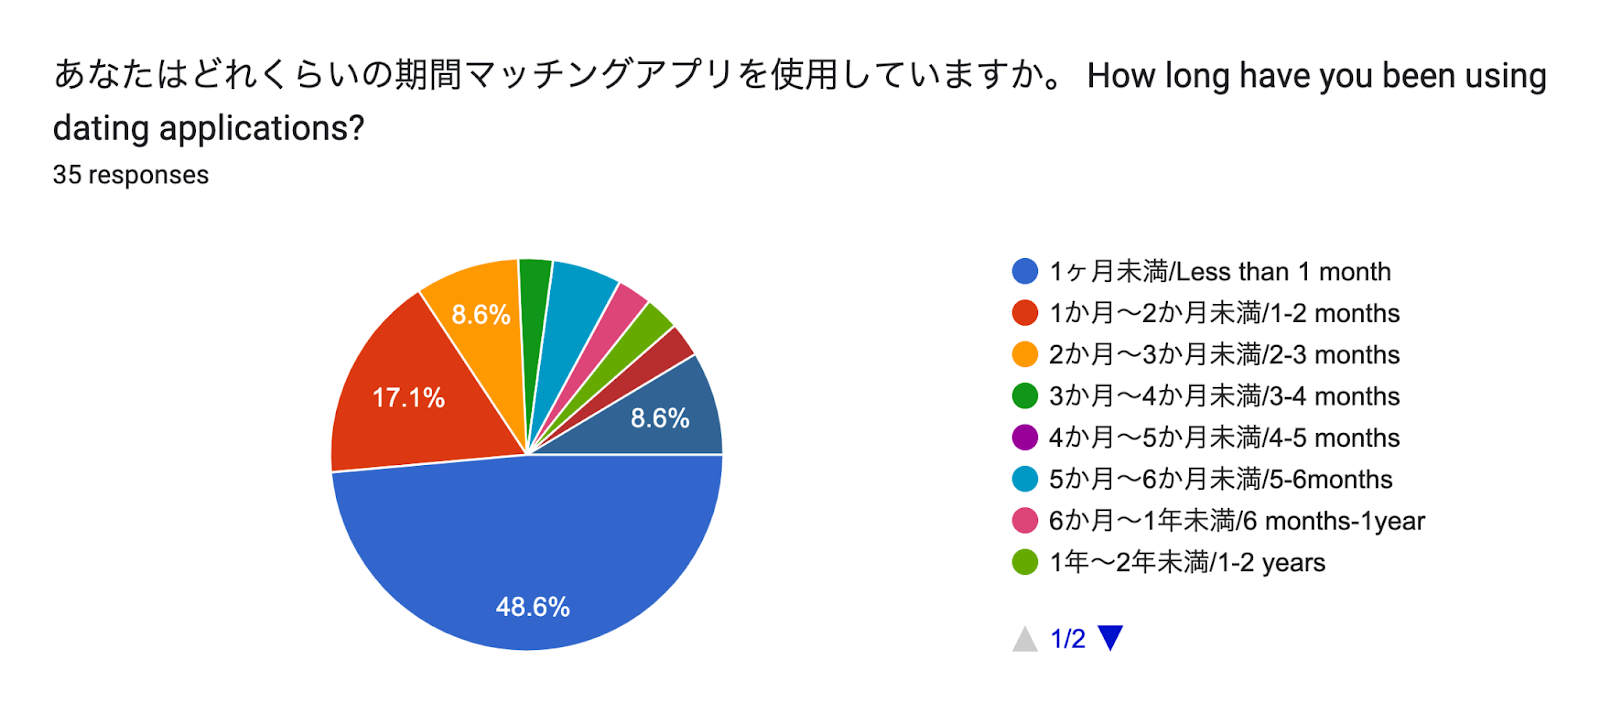 Forms response chart. Question title: あなたはどれくらいの期間マッチングアプリを使用していますか。
How long have you been using dating applications?. Number of responses: 35 responses.